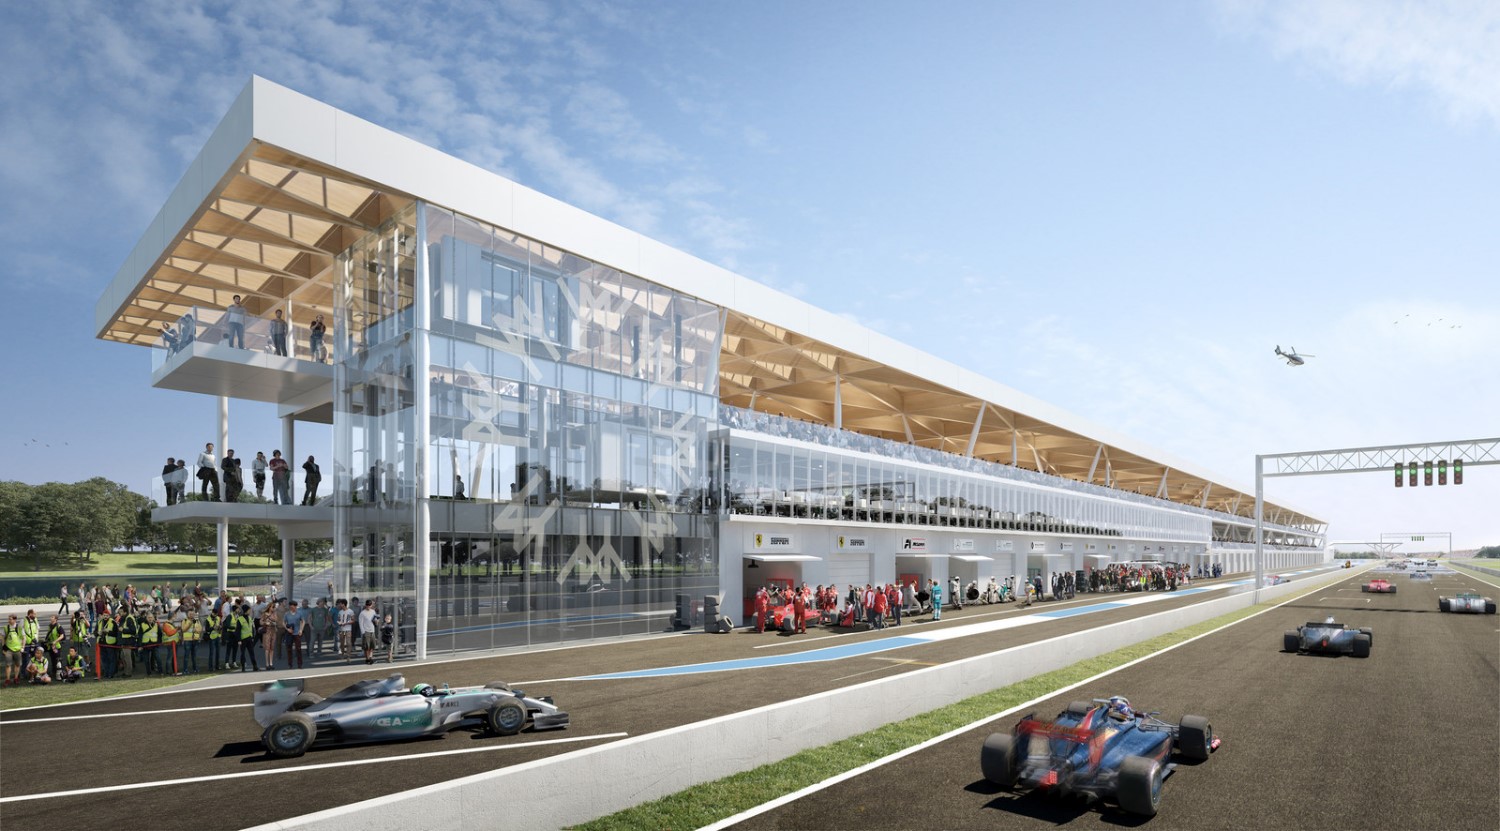 New Paddock Garages to be up by 2019 race